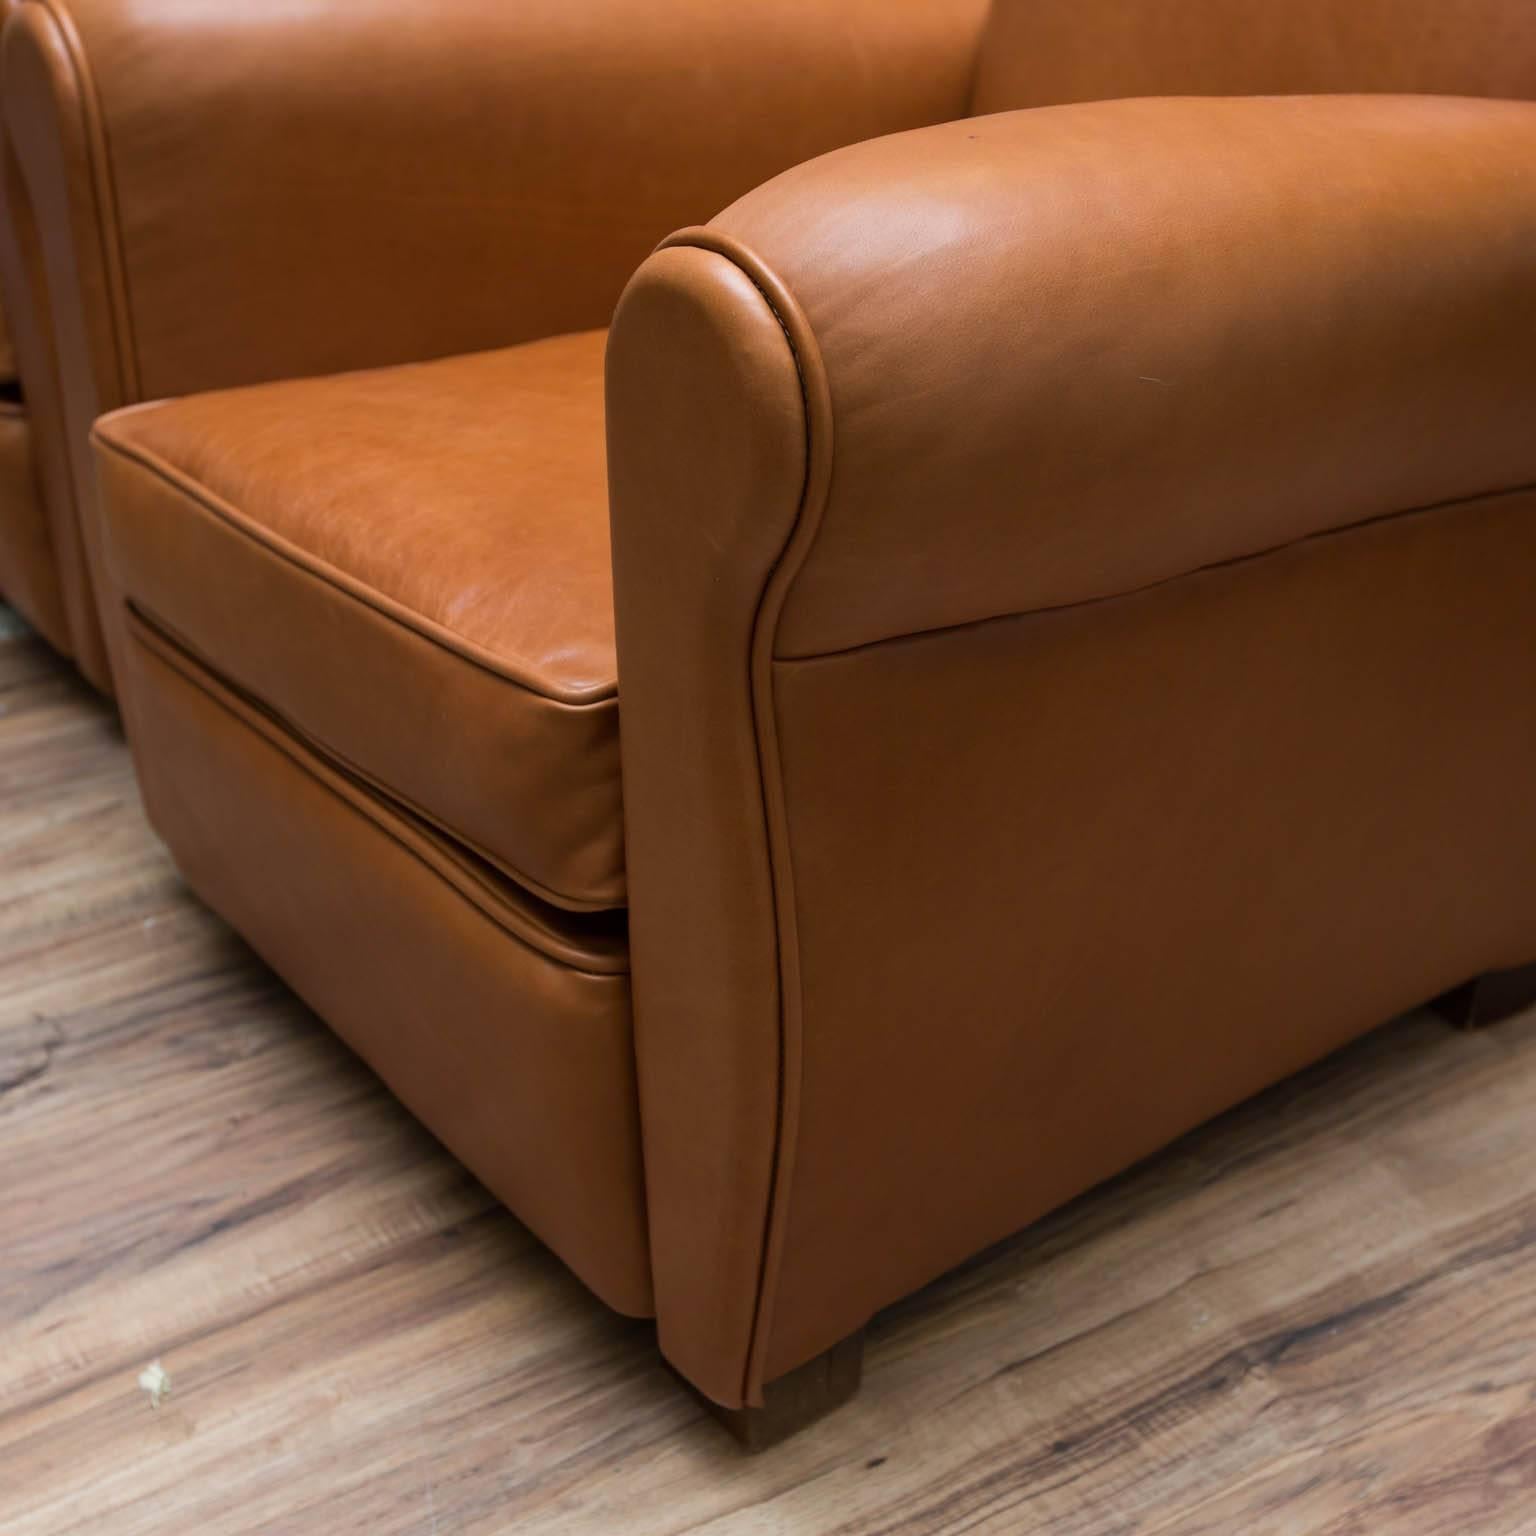 Classic French deco style club chairs in new tan nappa leather.